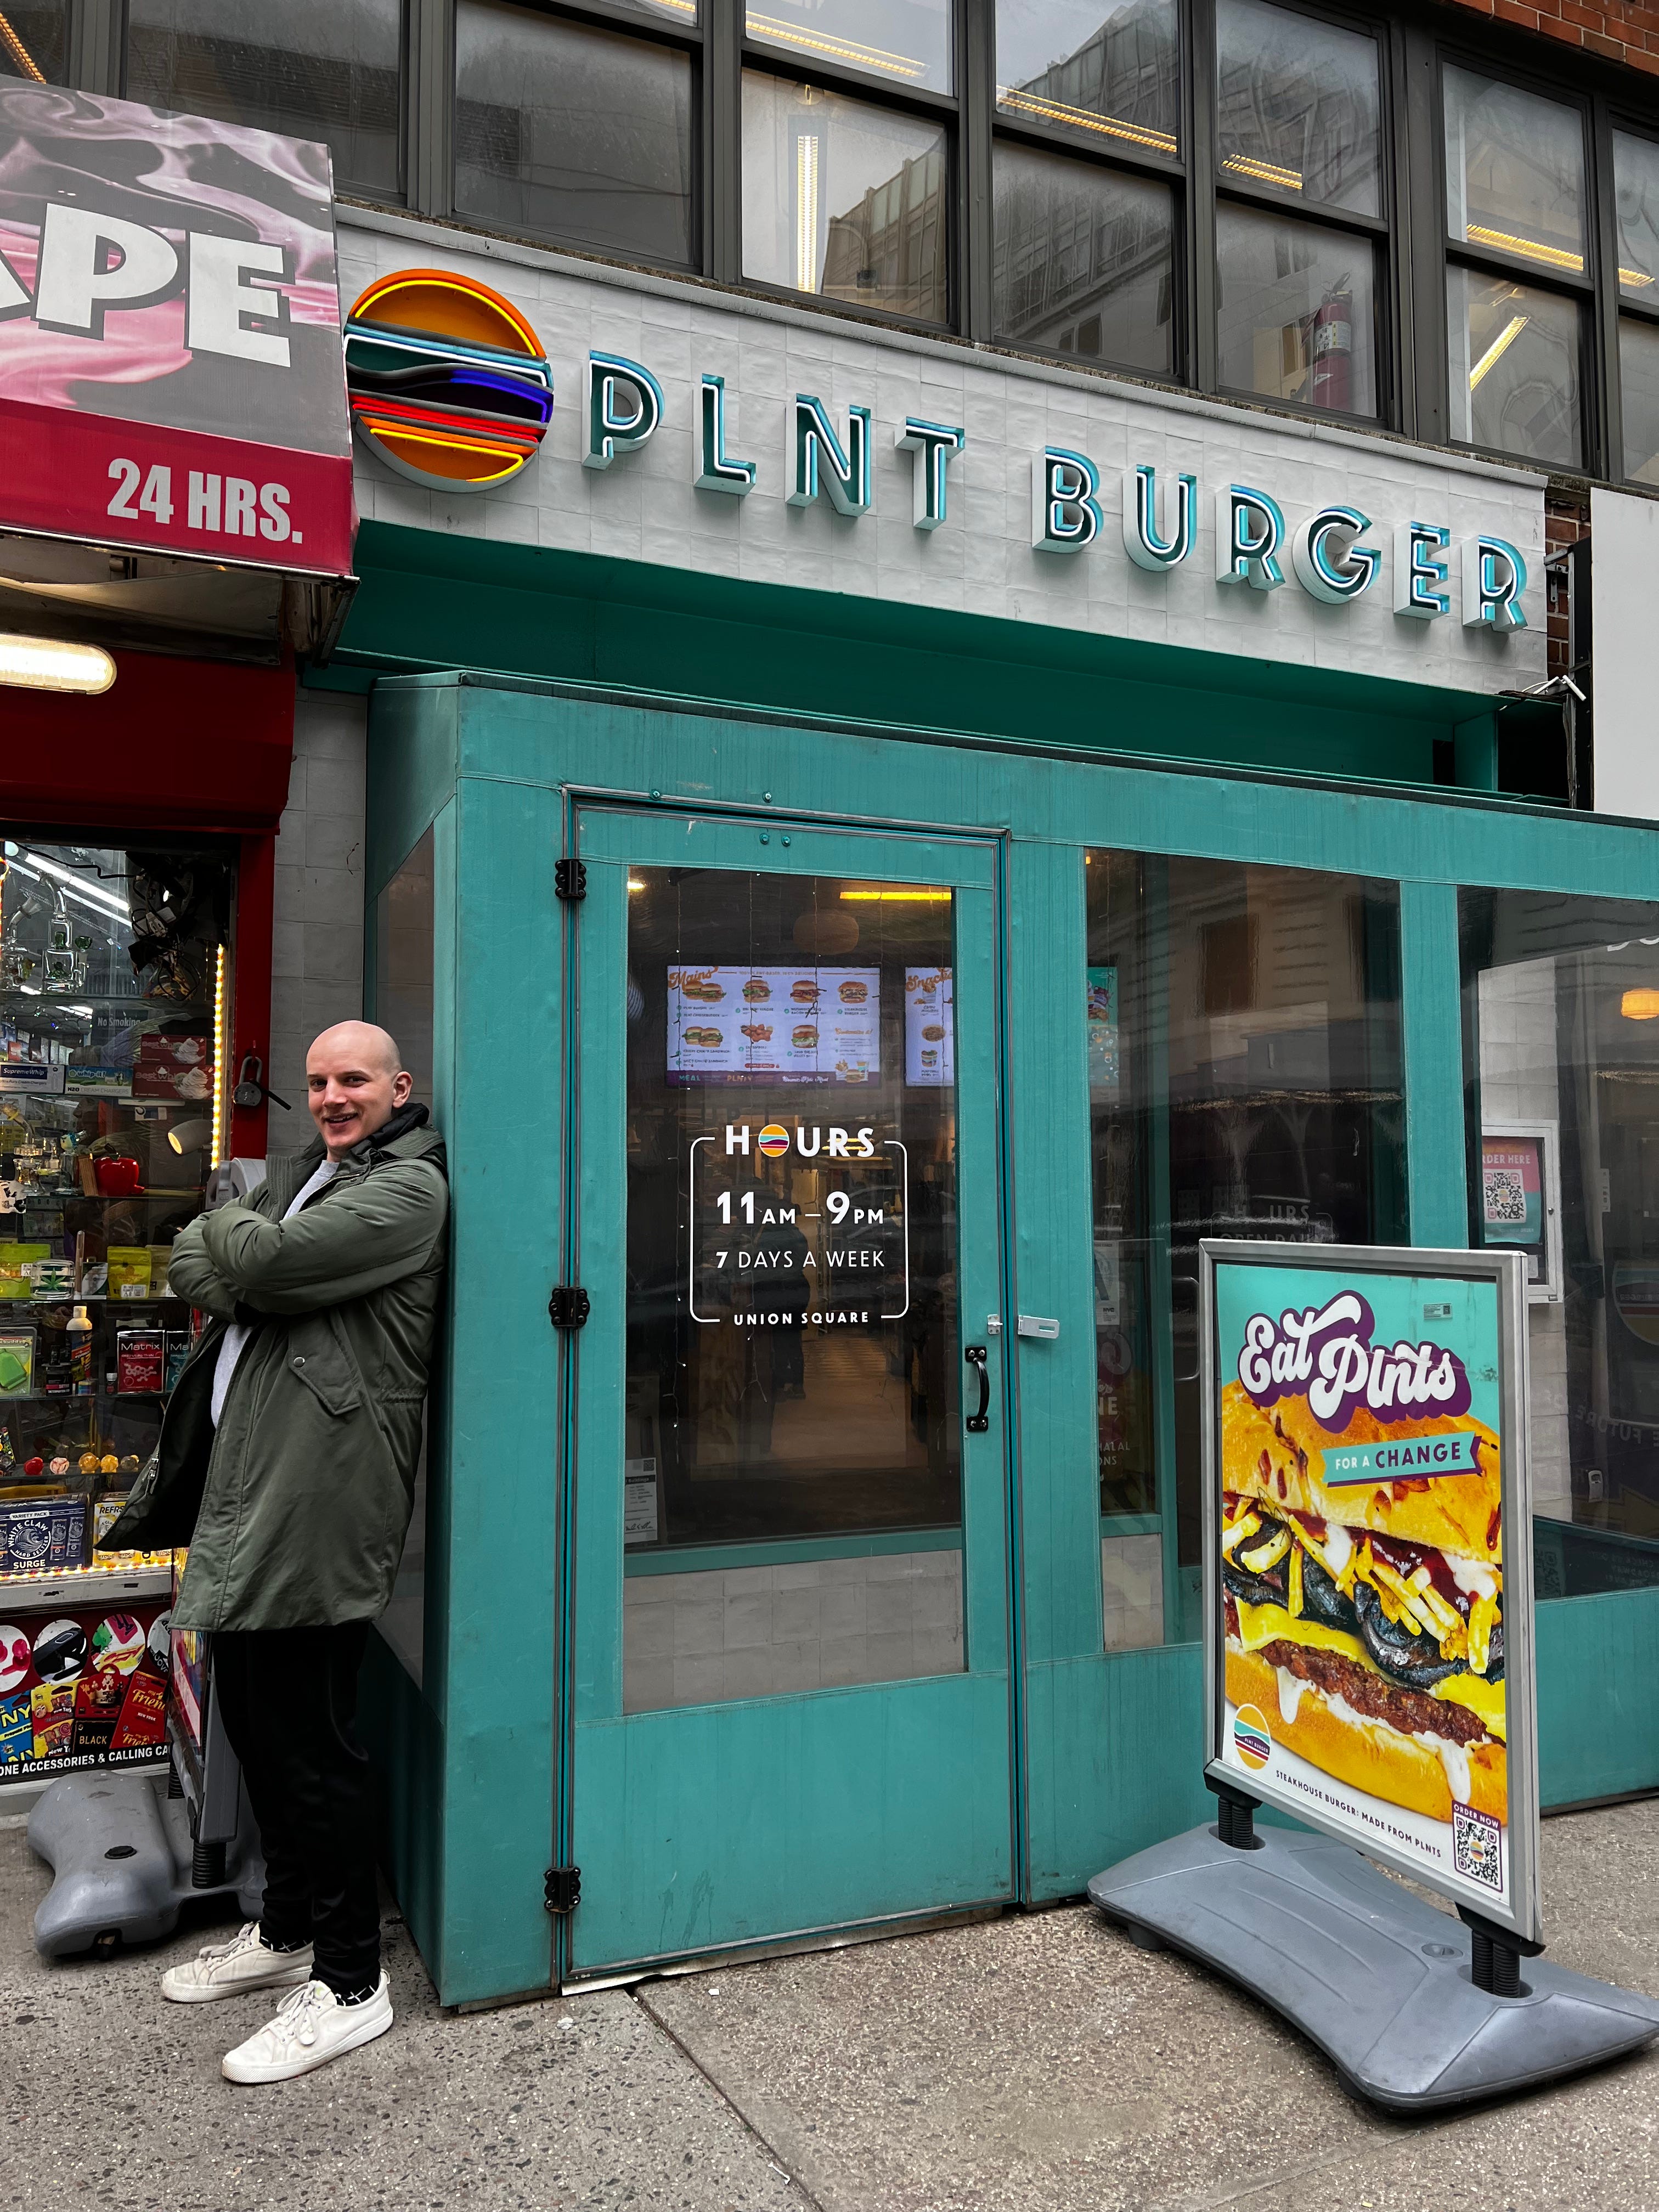 Thomas standing in front of PLNT Burger.